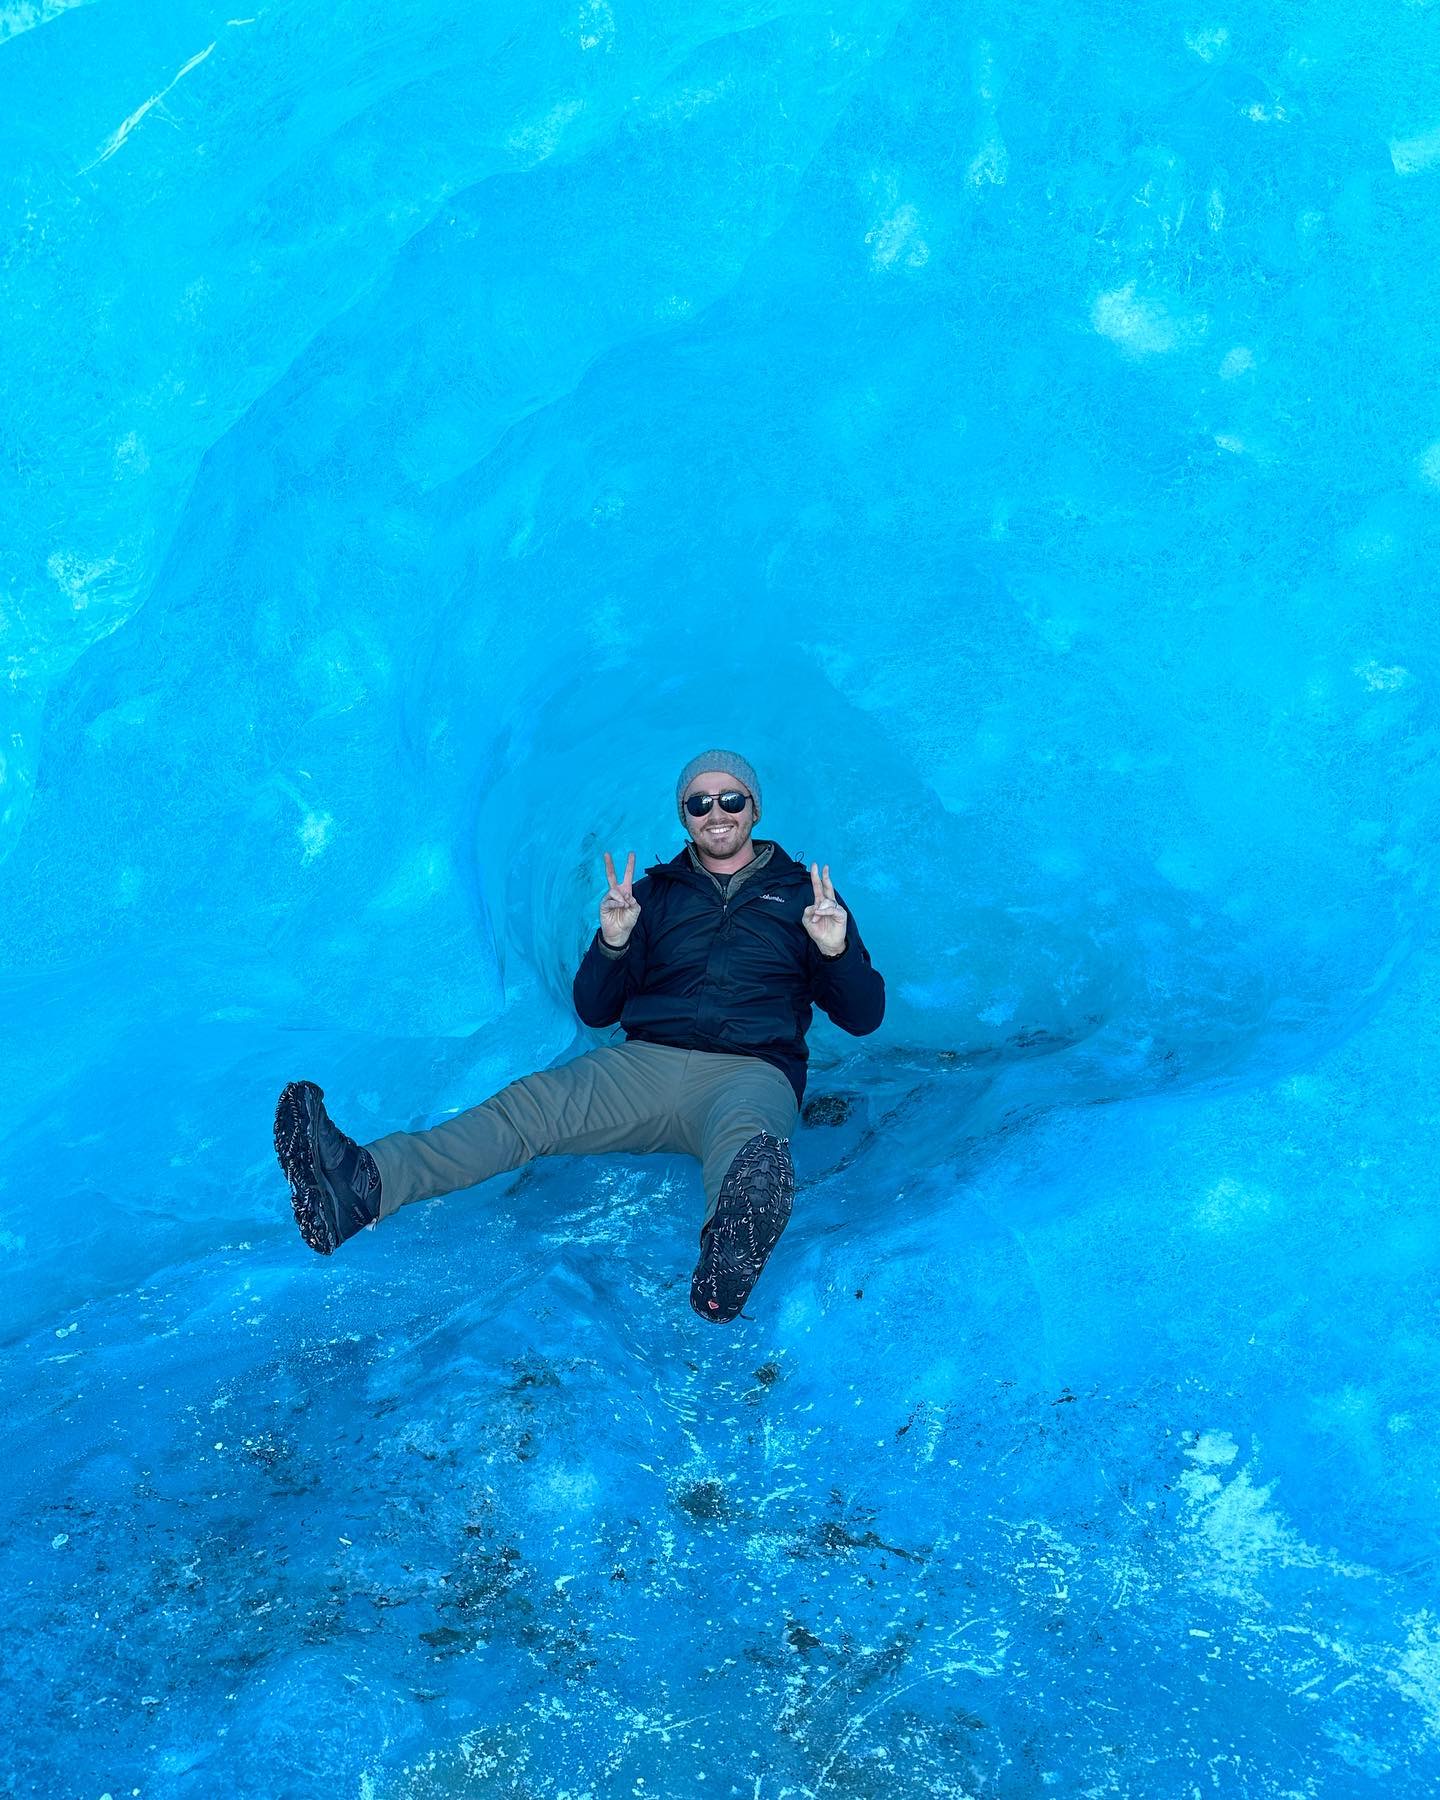 Glacier Cave- This is a picture of me in an iceberg in March when Mendenhall lake was still completely frozen.